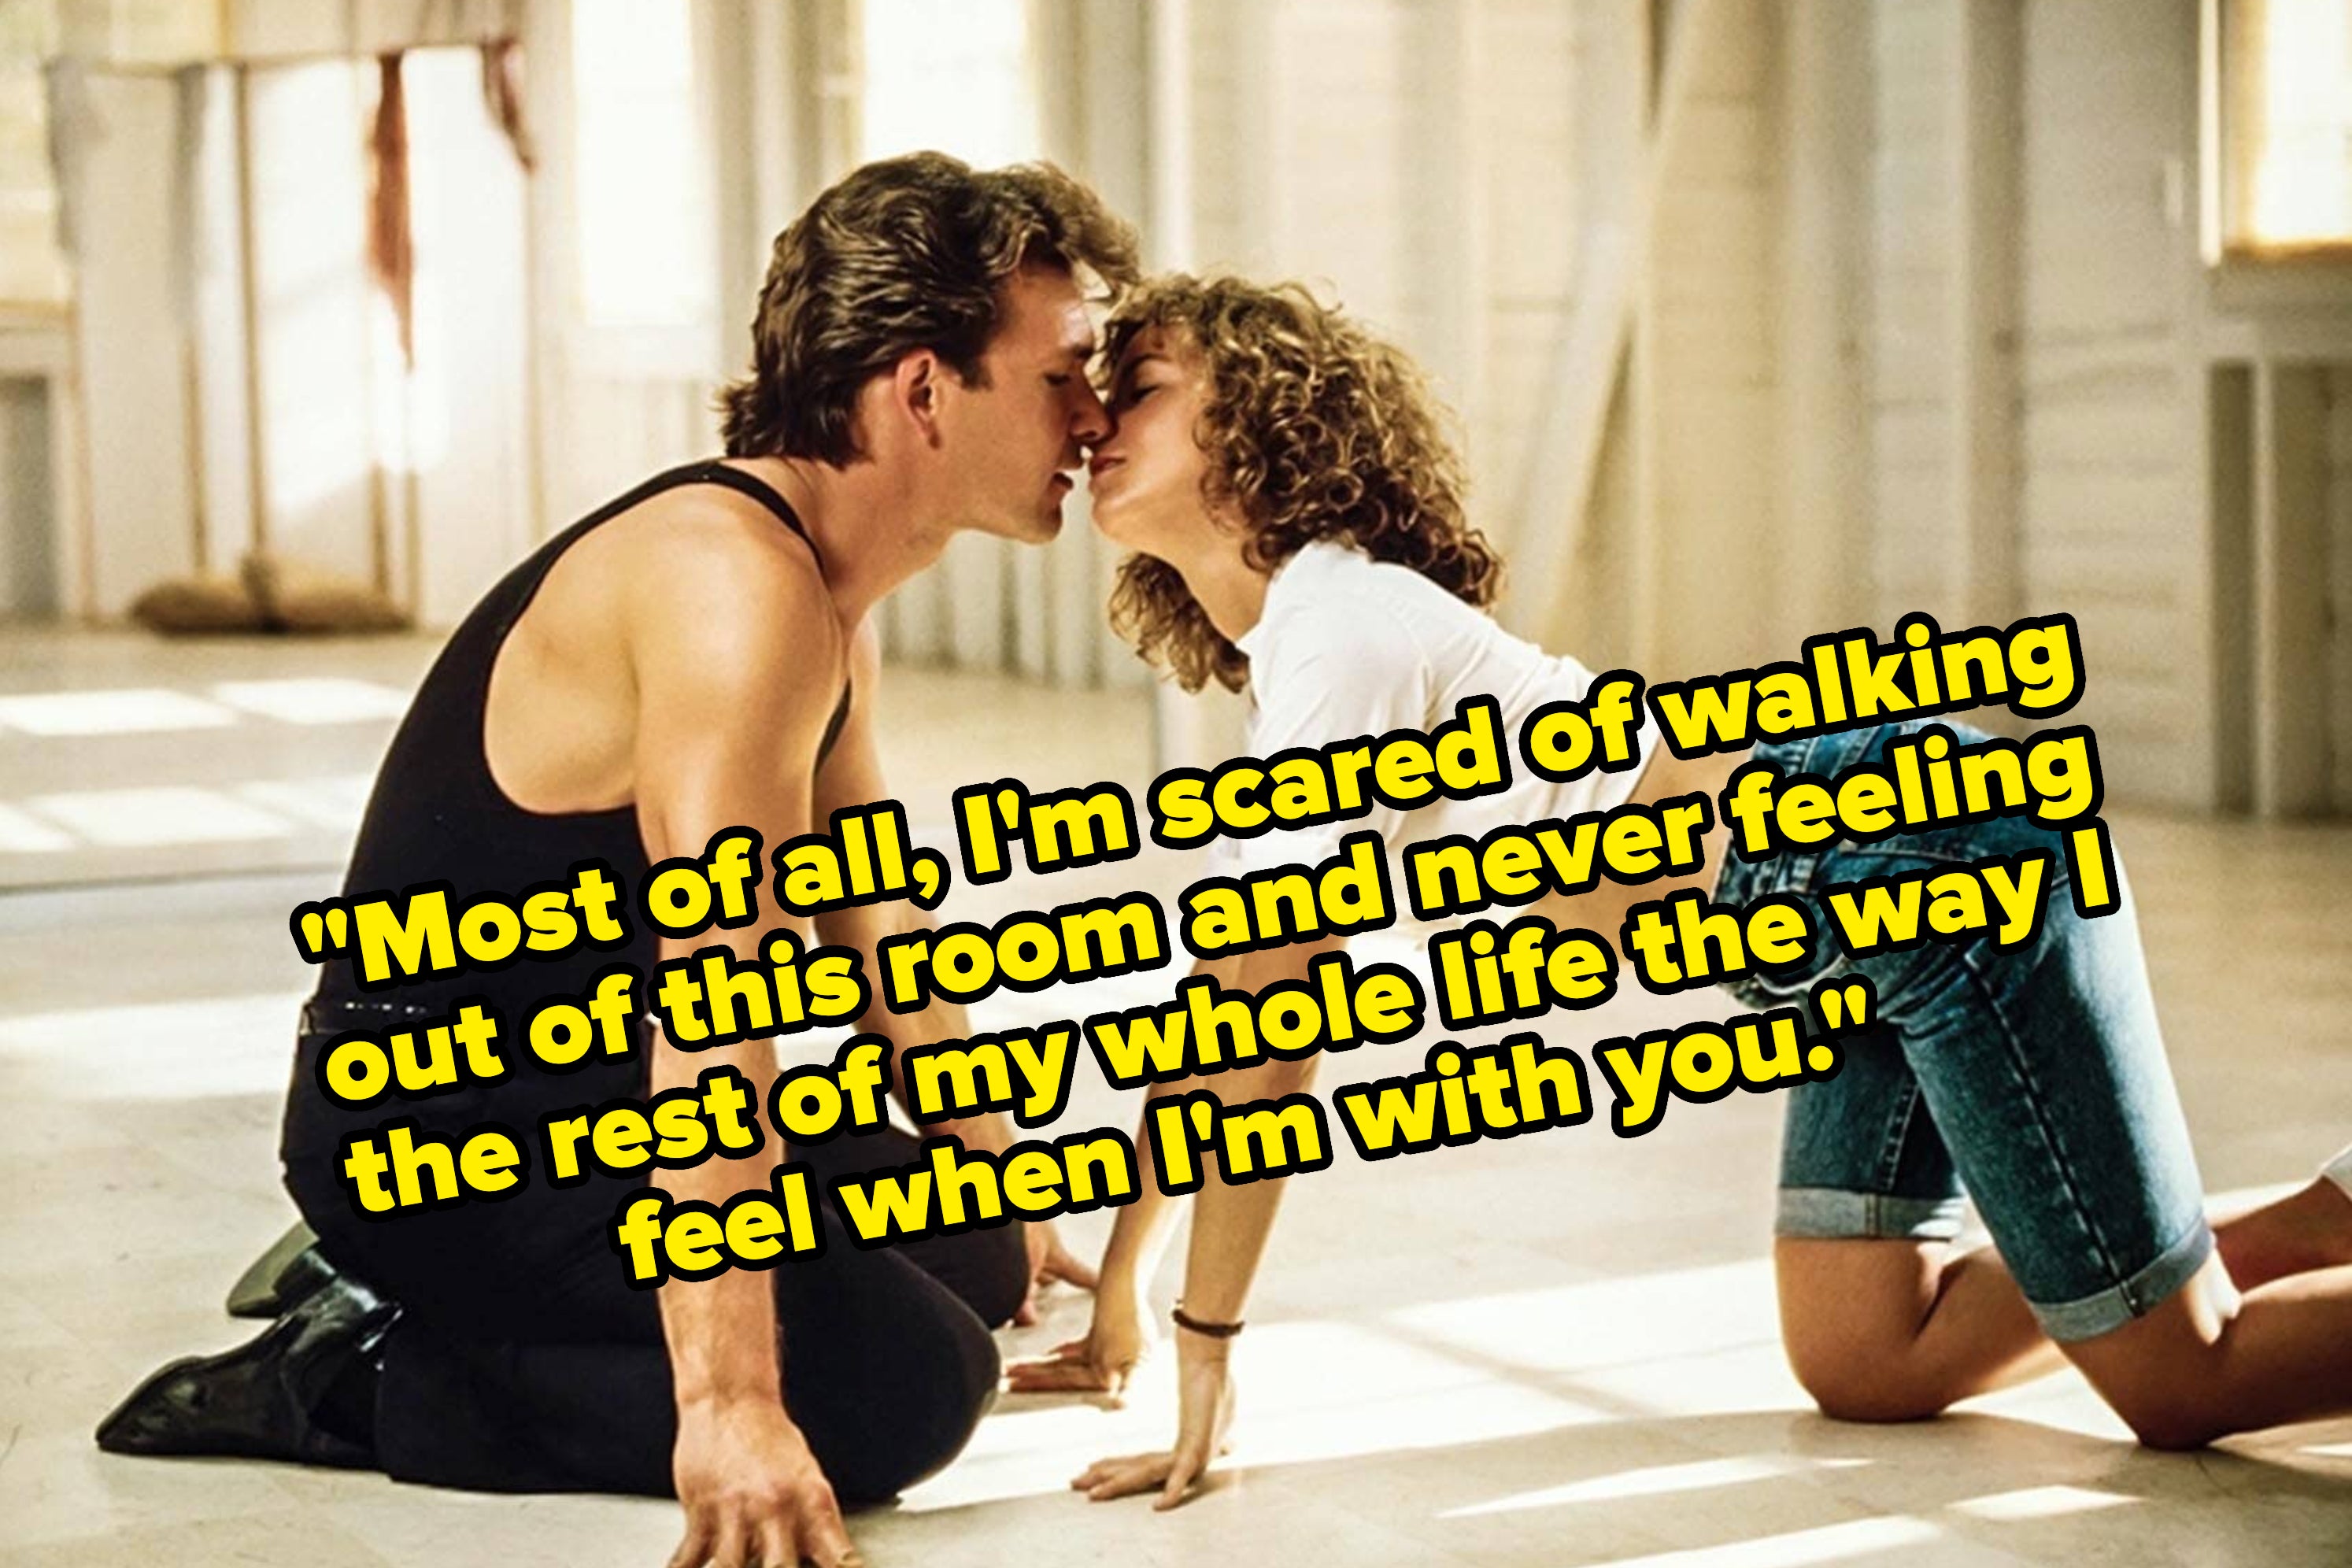 23 Romantic Movie Quotes That'll Make You Feel Like You Just Fell In Love All Over Again